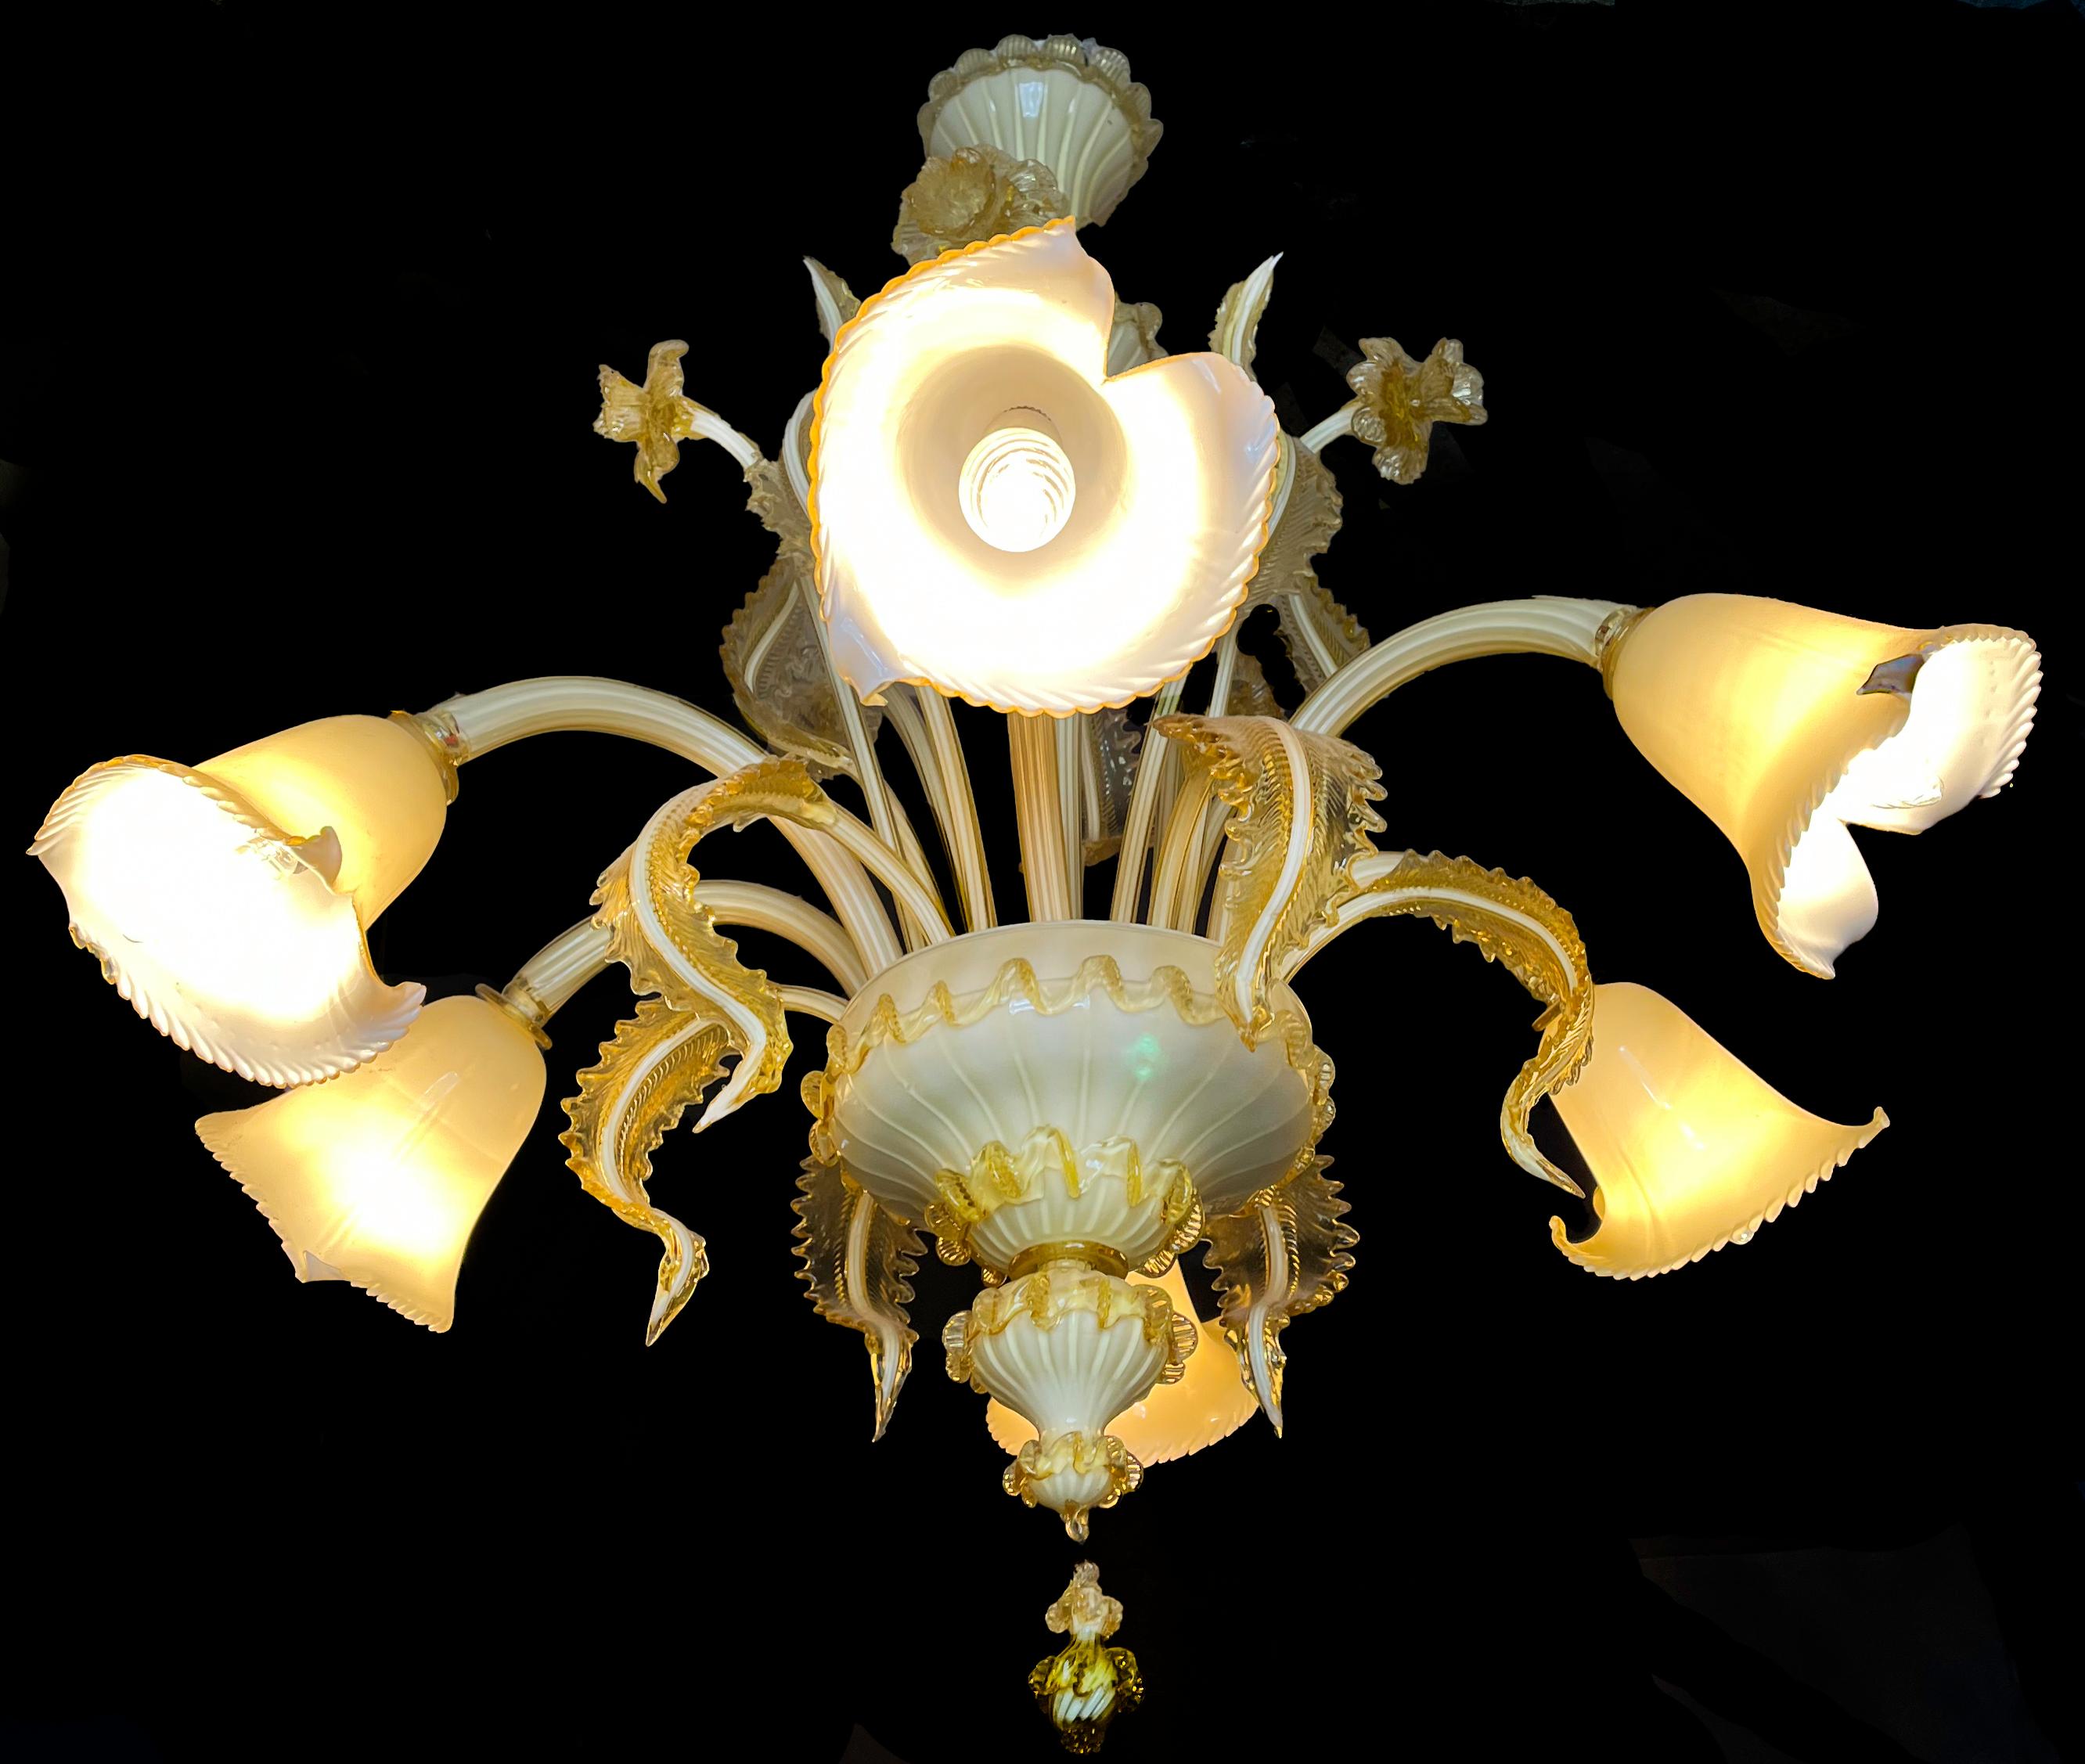 Wonderful murano chandelier opaline color formed by 6 arms with 6 points of light.
The chandelier is rich in decorations, consisting of 10 beautiful gold leaf.
Measures: The height from the highest point is 120 cm while the diameter is 83 cm.
One of